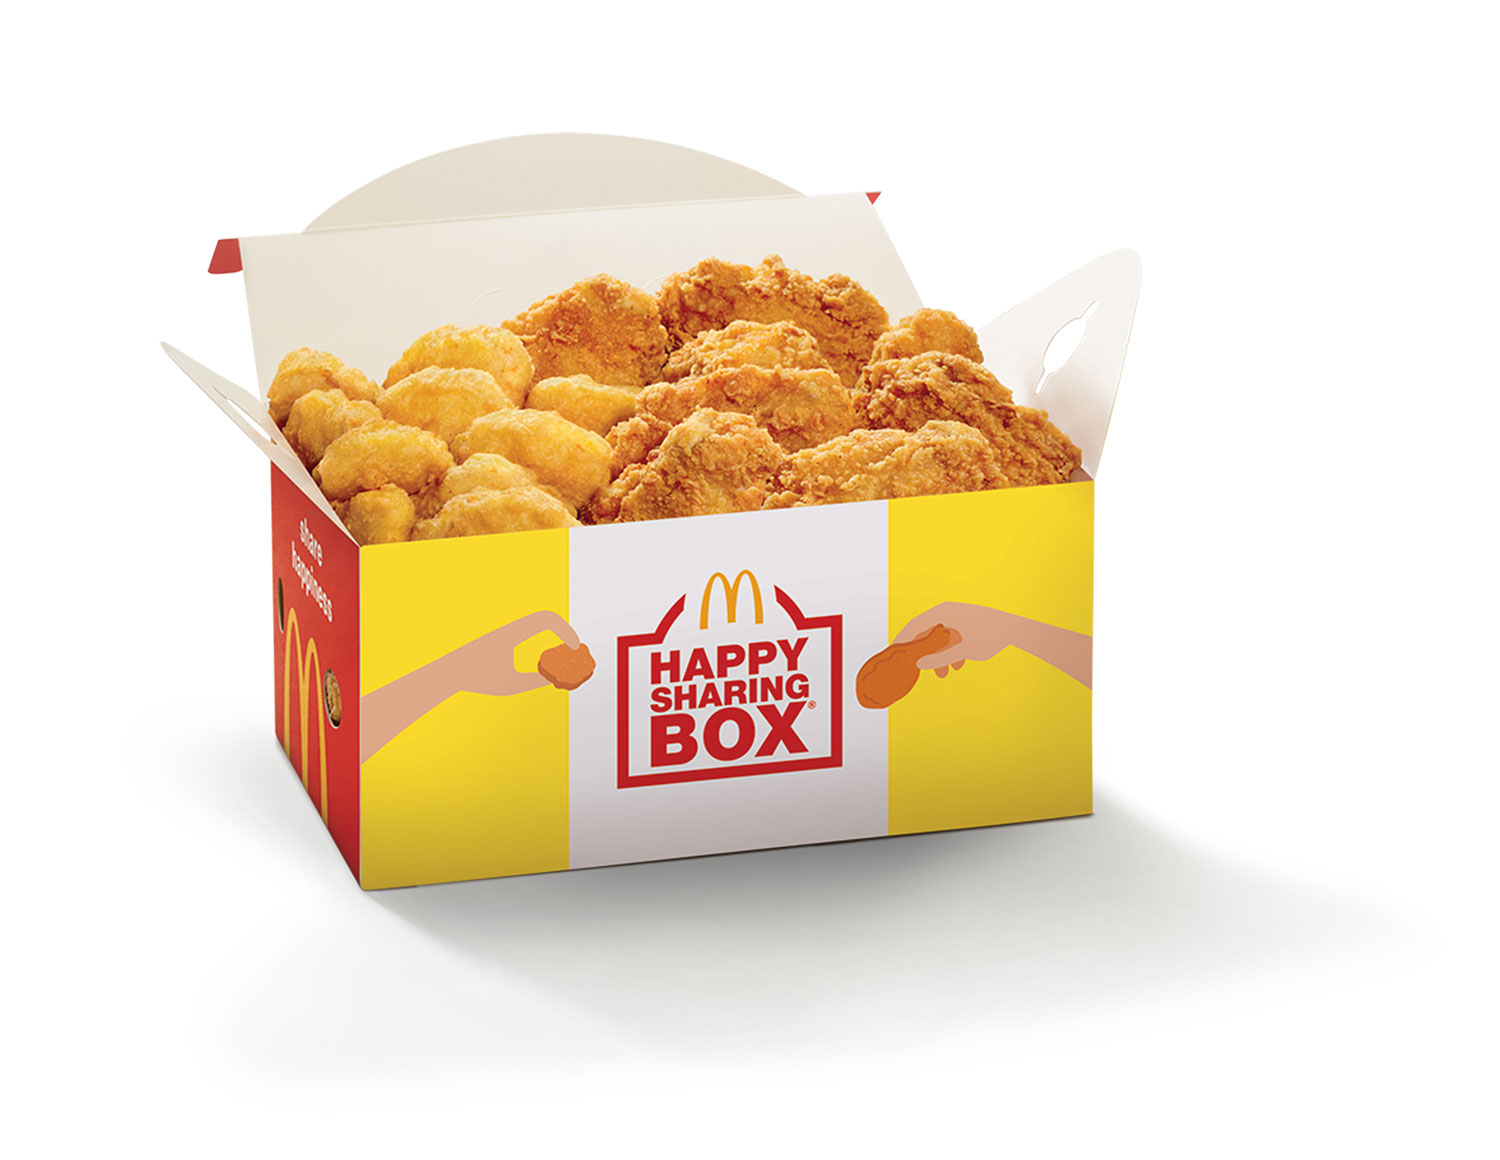 Happy Sharing Box A, available via McDelivery and GrabFood at $9.90 (U.P $13.95)